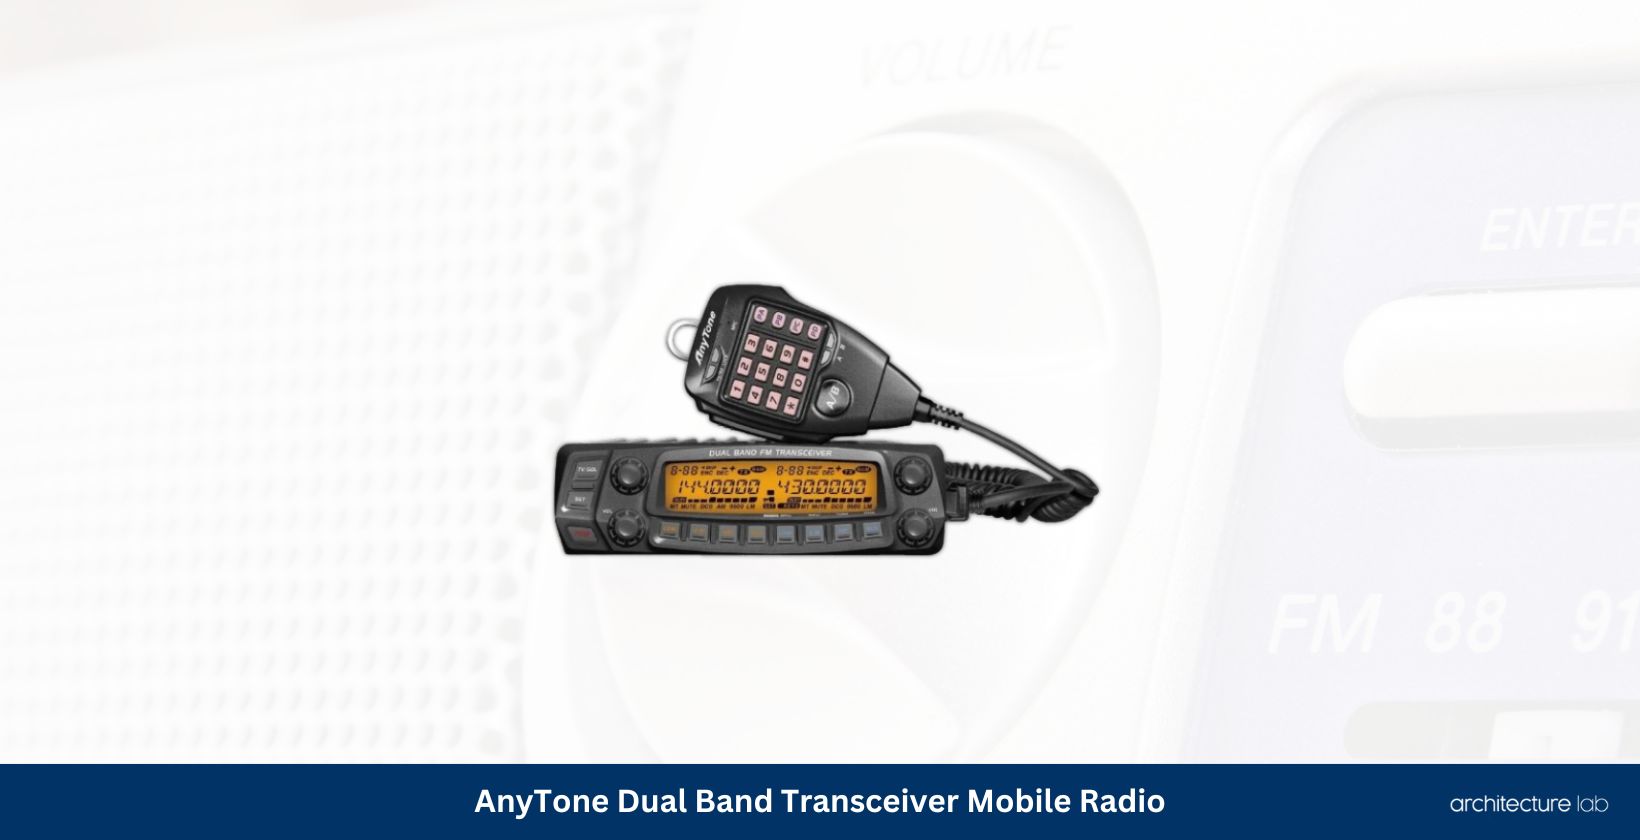 Anytone at 5888uv dual band transceiver mobile radio